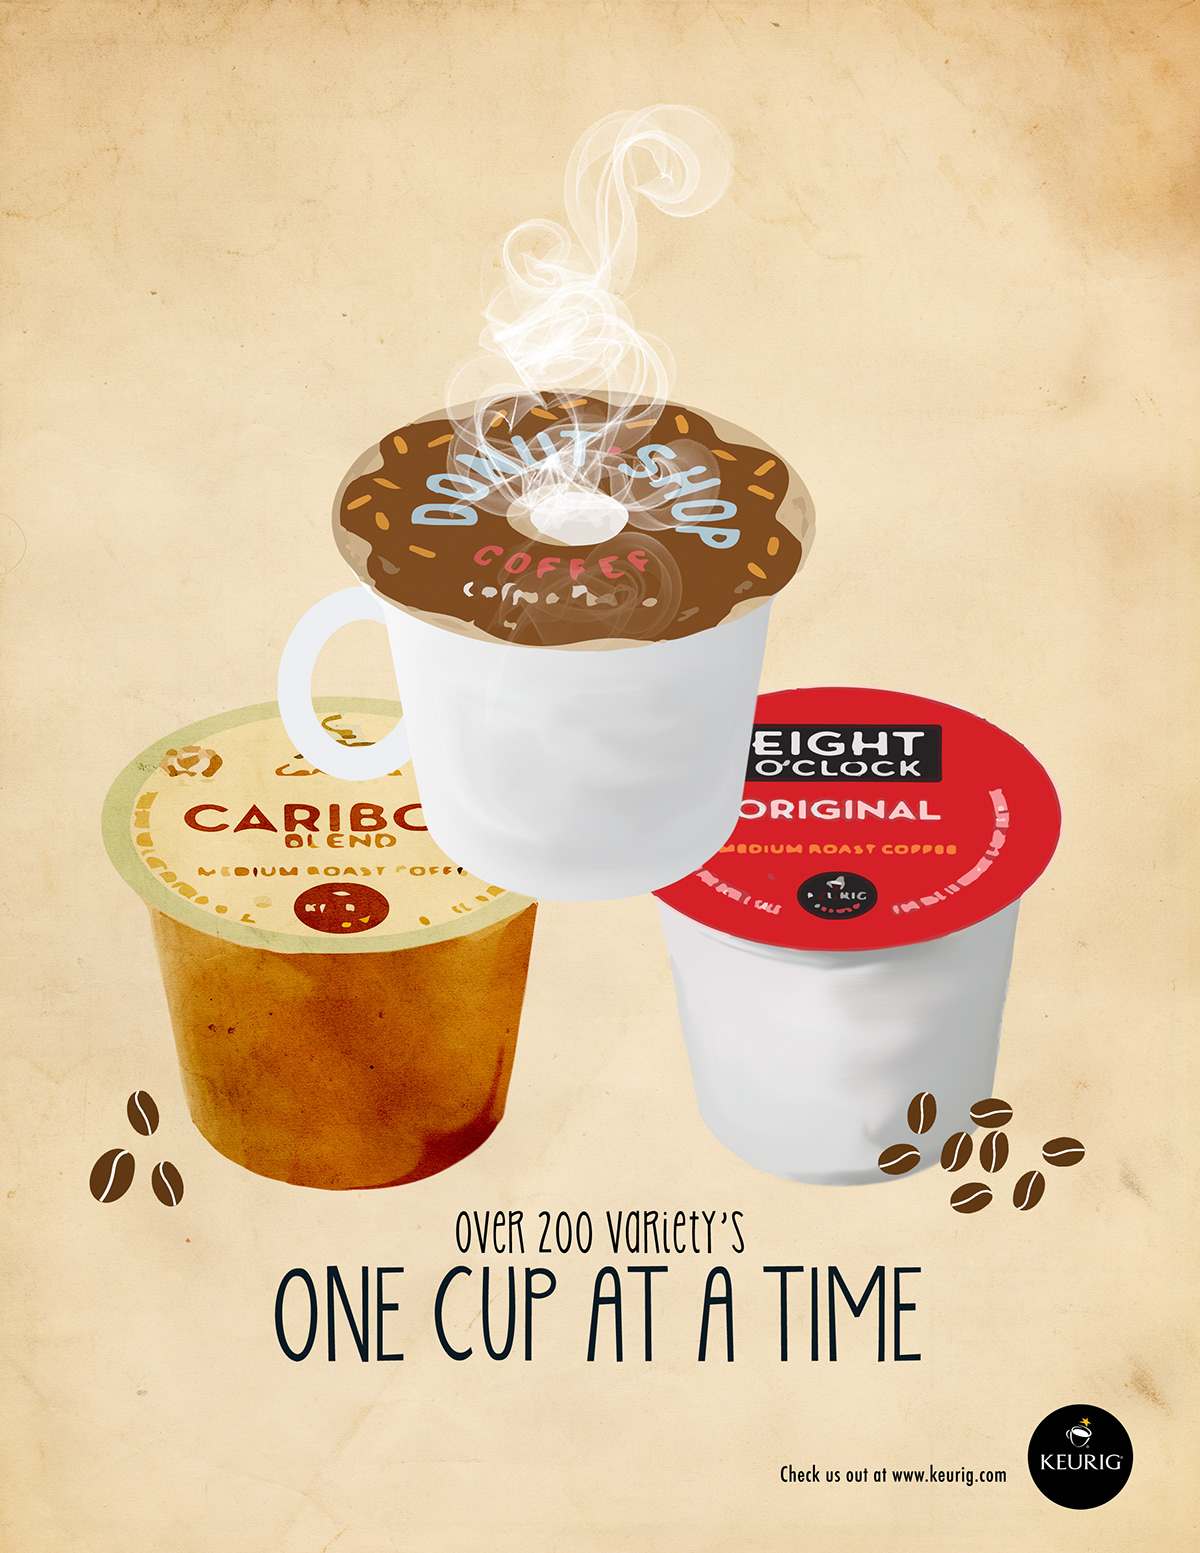 advertising design student keurig kcups ad campaign Coffee print